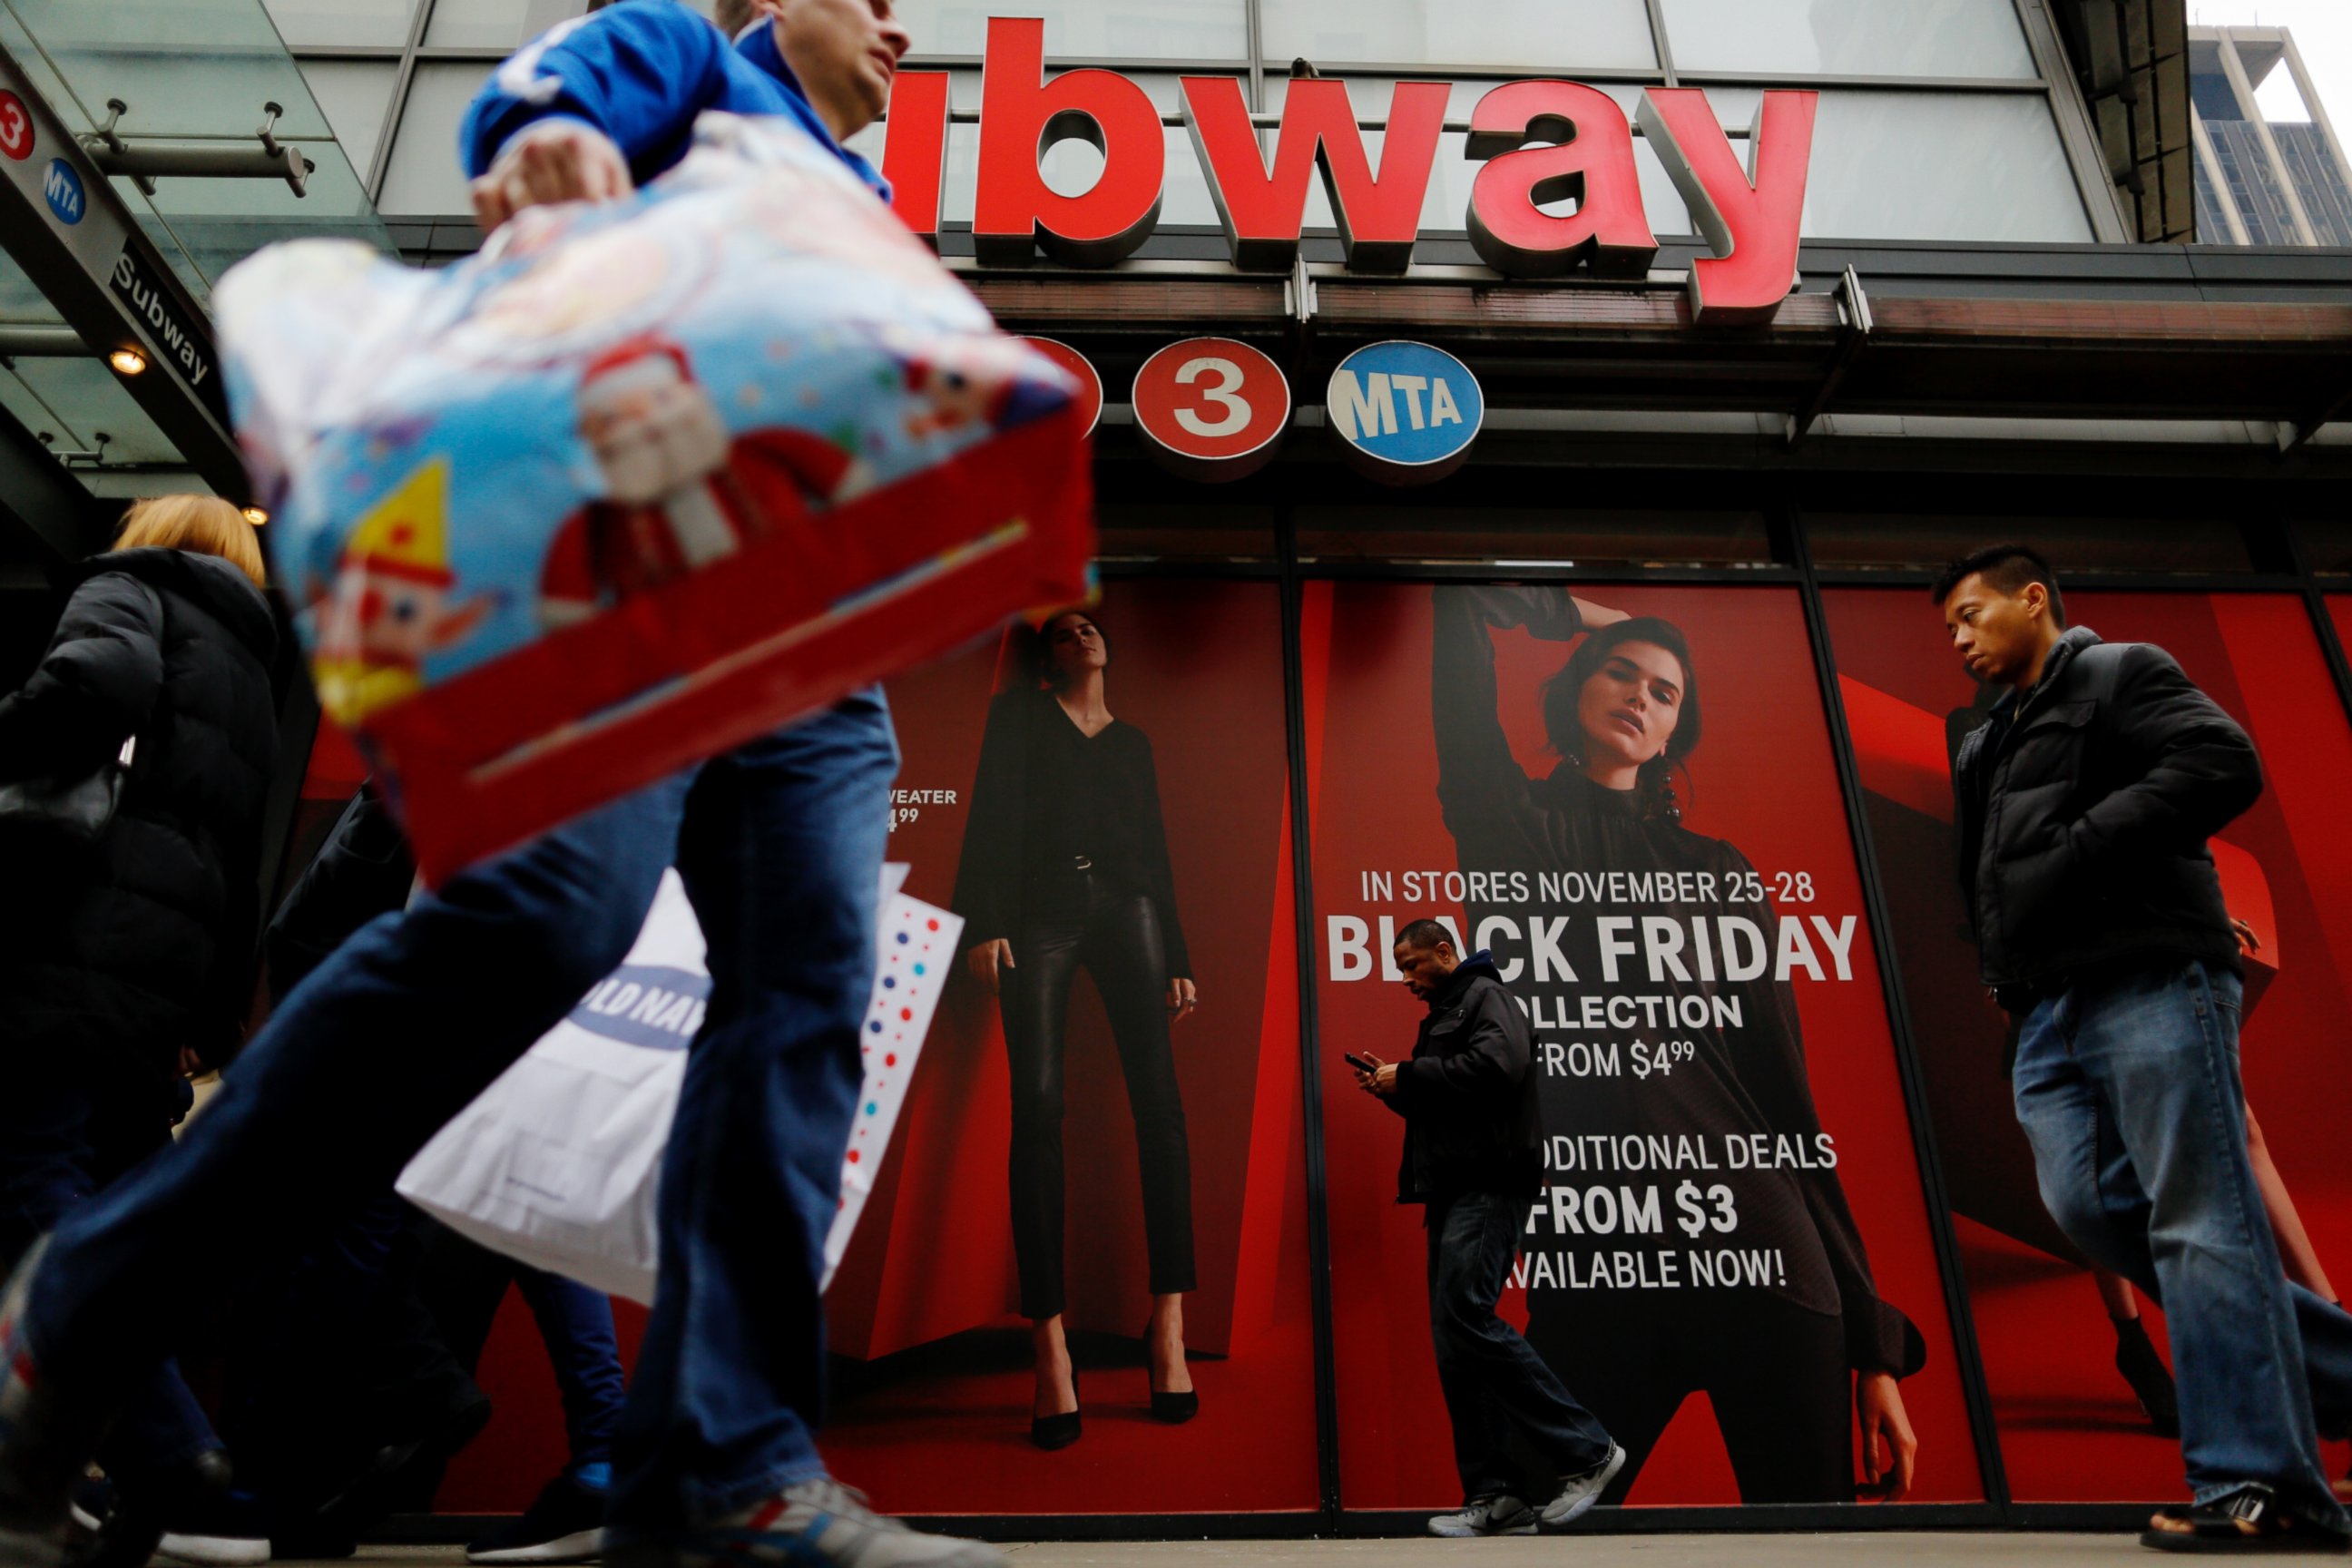 PHOTO: People walk with shopping bags during Black Friday events on Nov. 25, 2016 in New York.